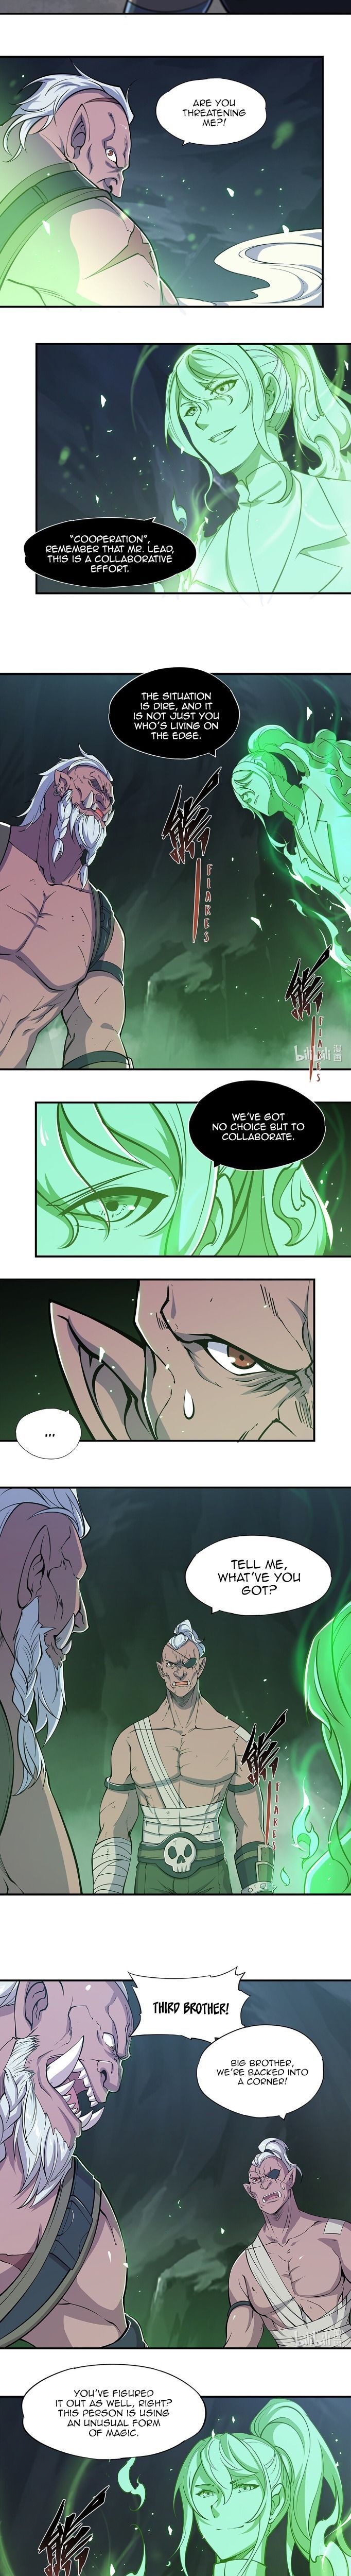 The Blood Princess and the Knight Chapter 052 page 6